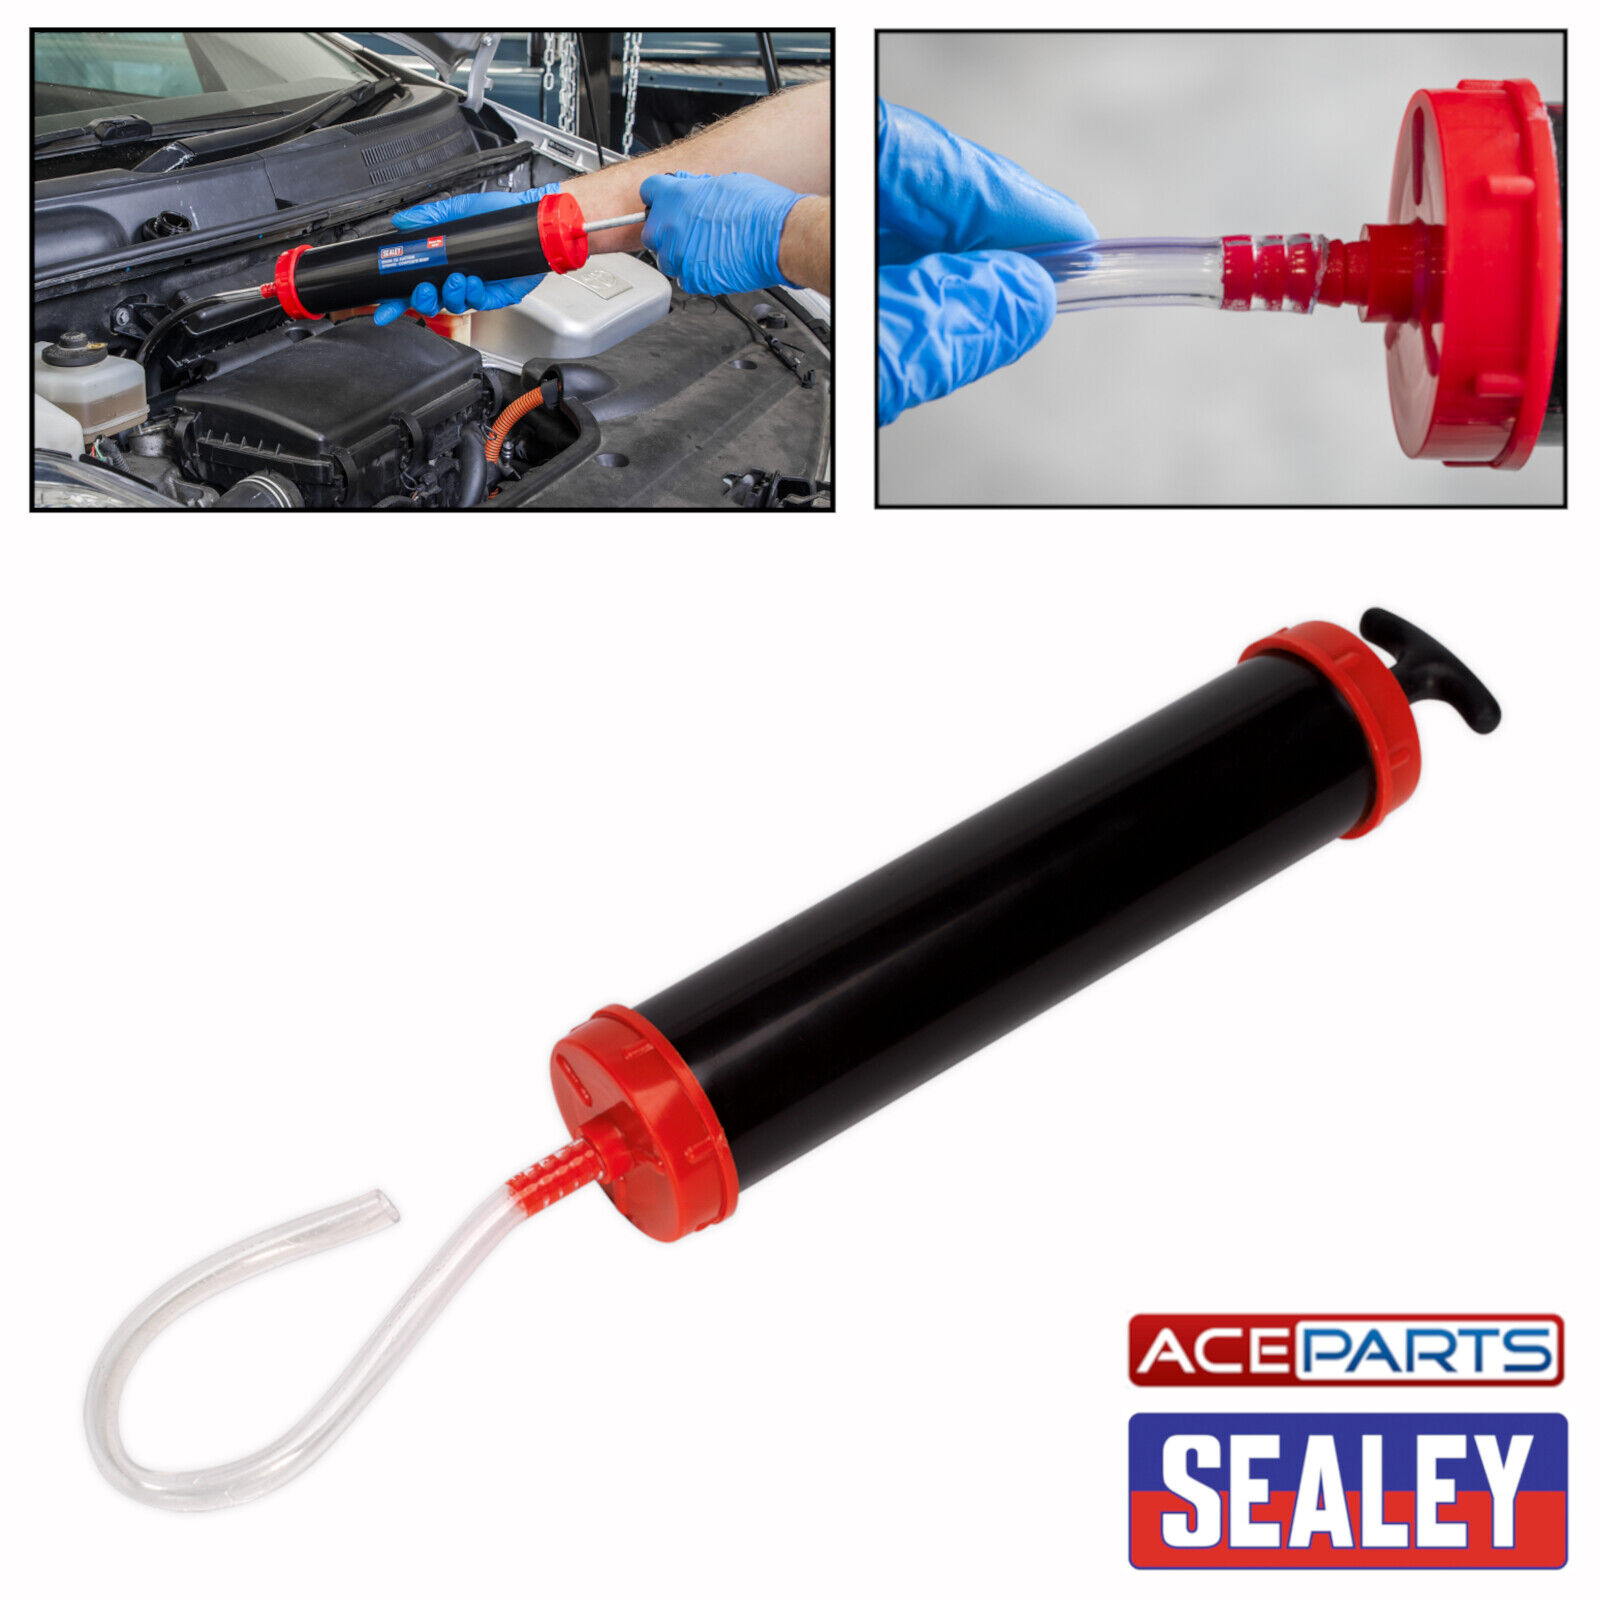 Sealey AK47 Oil Suction Hand Syringe Gun Pump 500ml Gearbox Fill / Extractor